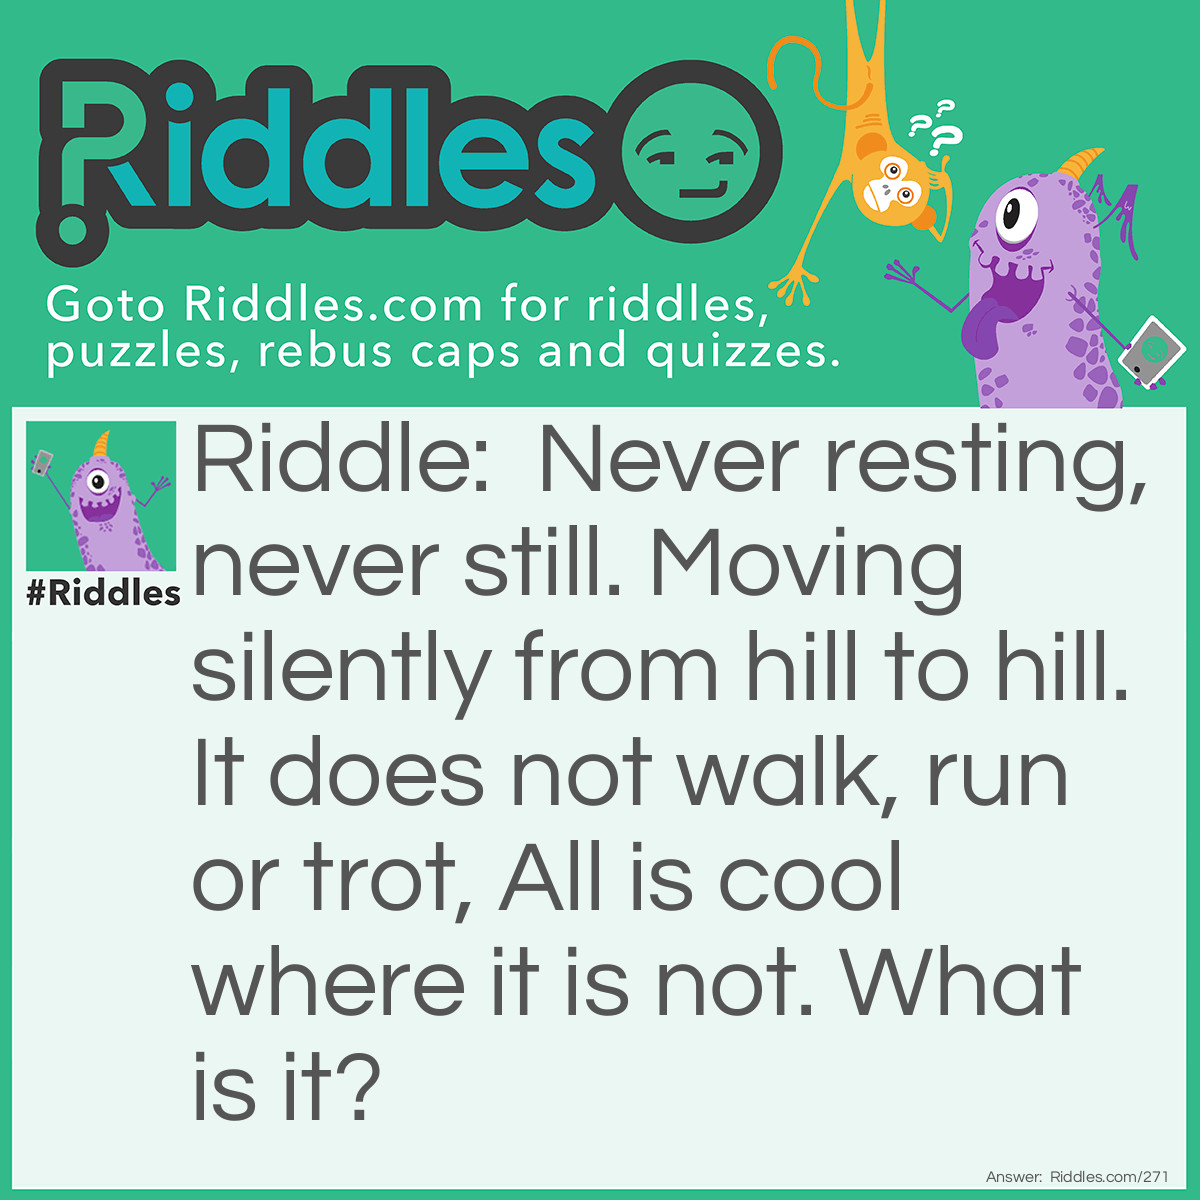 Riddle: Never resting, never still. Moving silently from hill to hill. It does not walk, run or trot, All is cool where it is not. What is it? Answer: Sunshine.